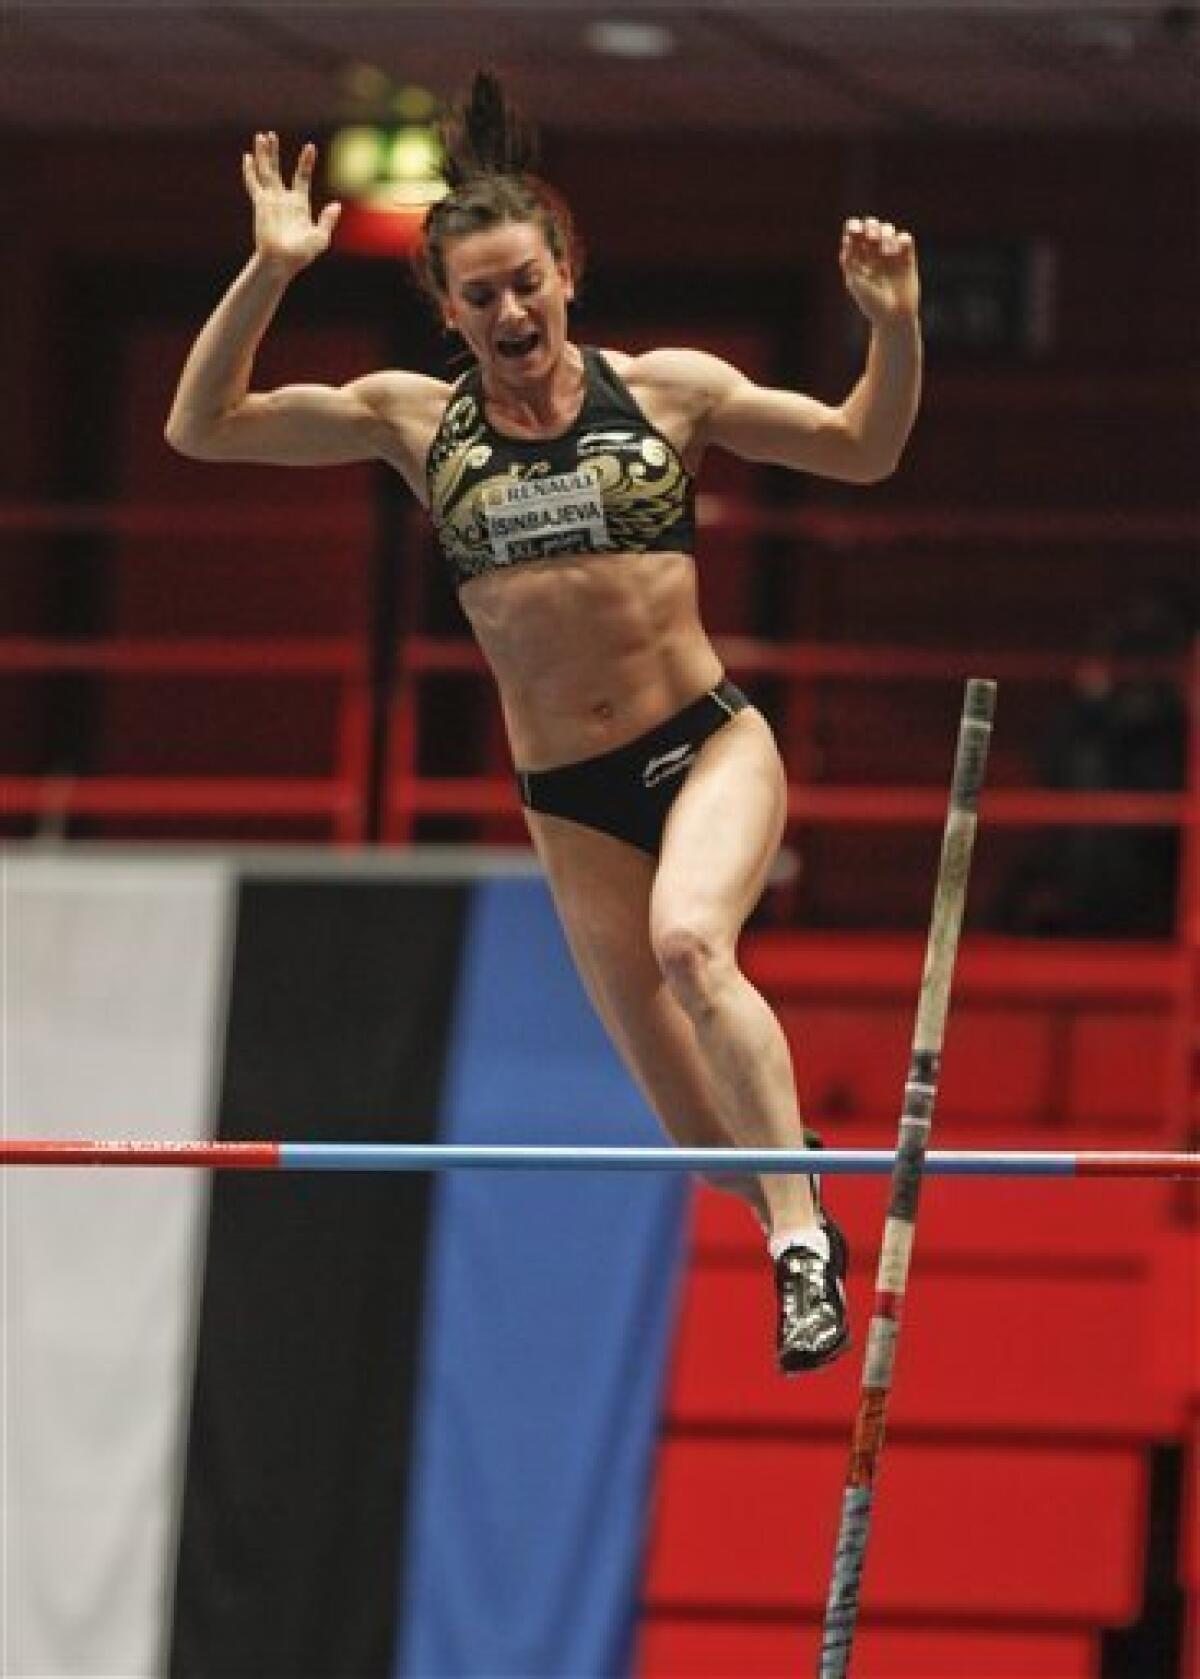 Yelena Isinbayeva of Russia reacts as she competes to win the women's pole vault during the XL-Galan Indoor athletics meeting in Stockholm, Sweden, Thursday Feb. 23, 2012. (AP Photo / Fredrick Persson) SWEDEN OUT